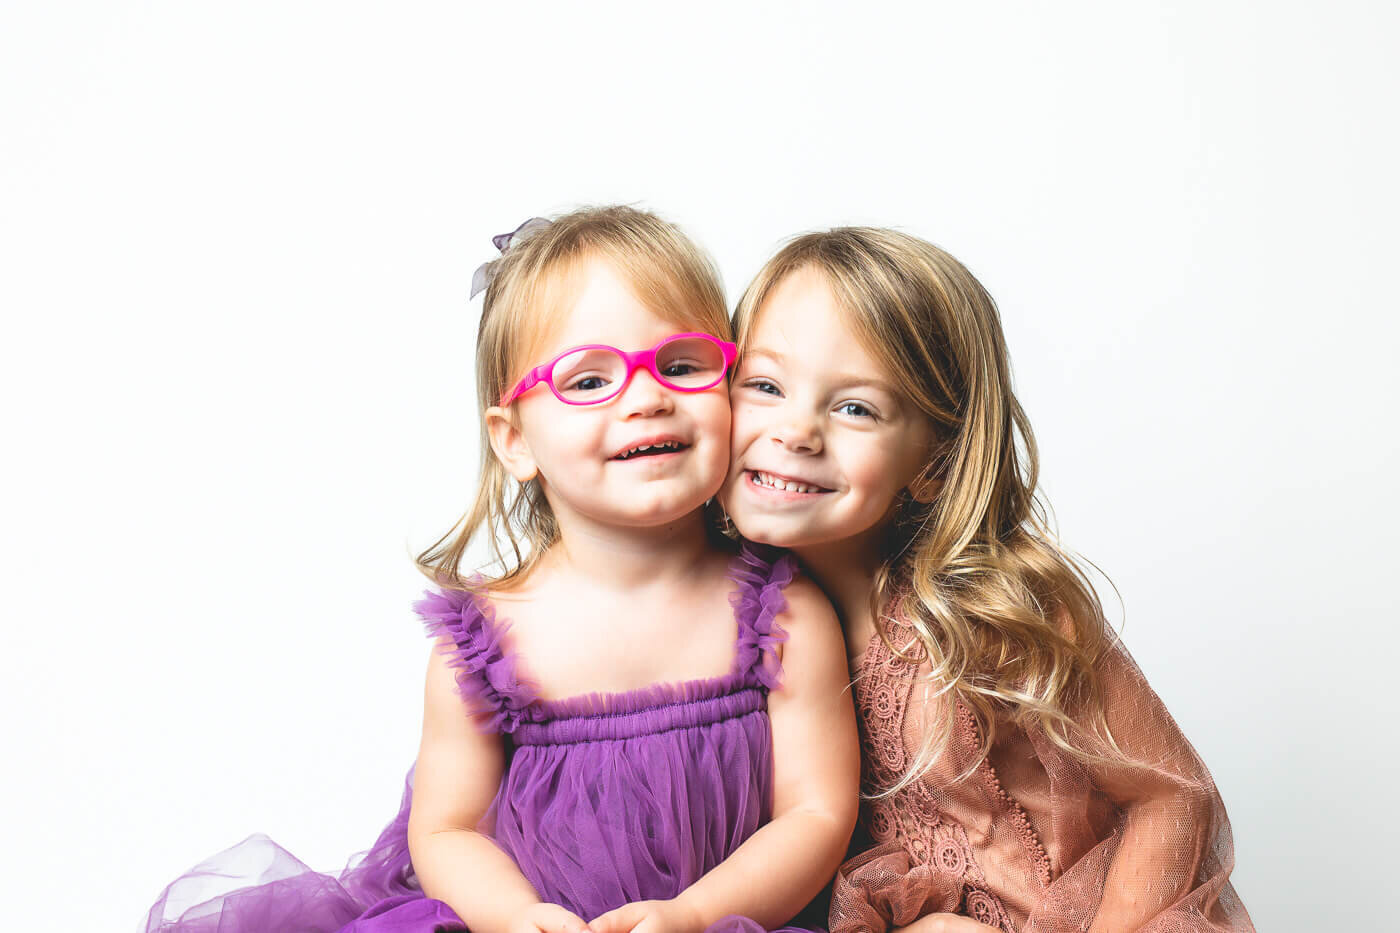 Tampa photographer showcases caring sister sitting together